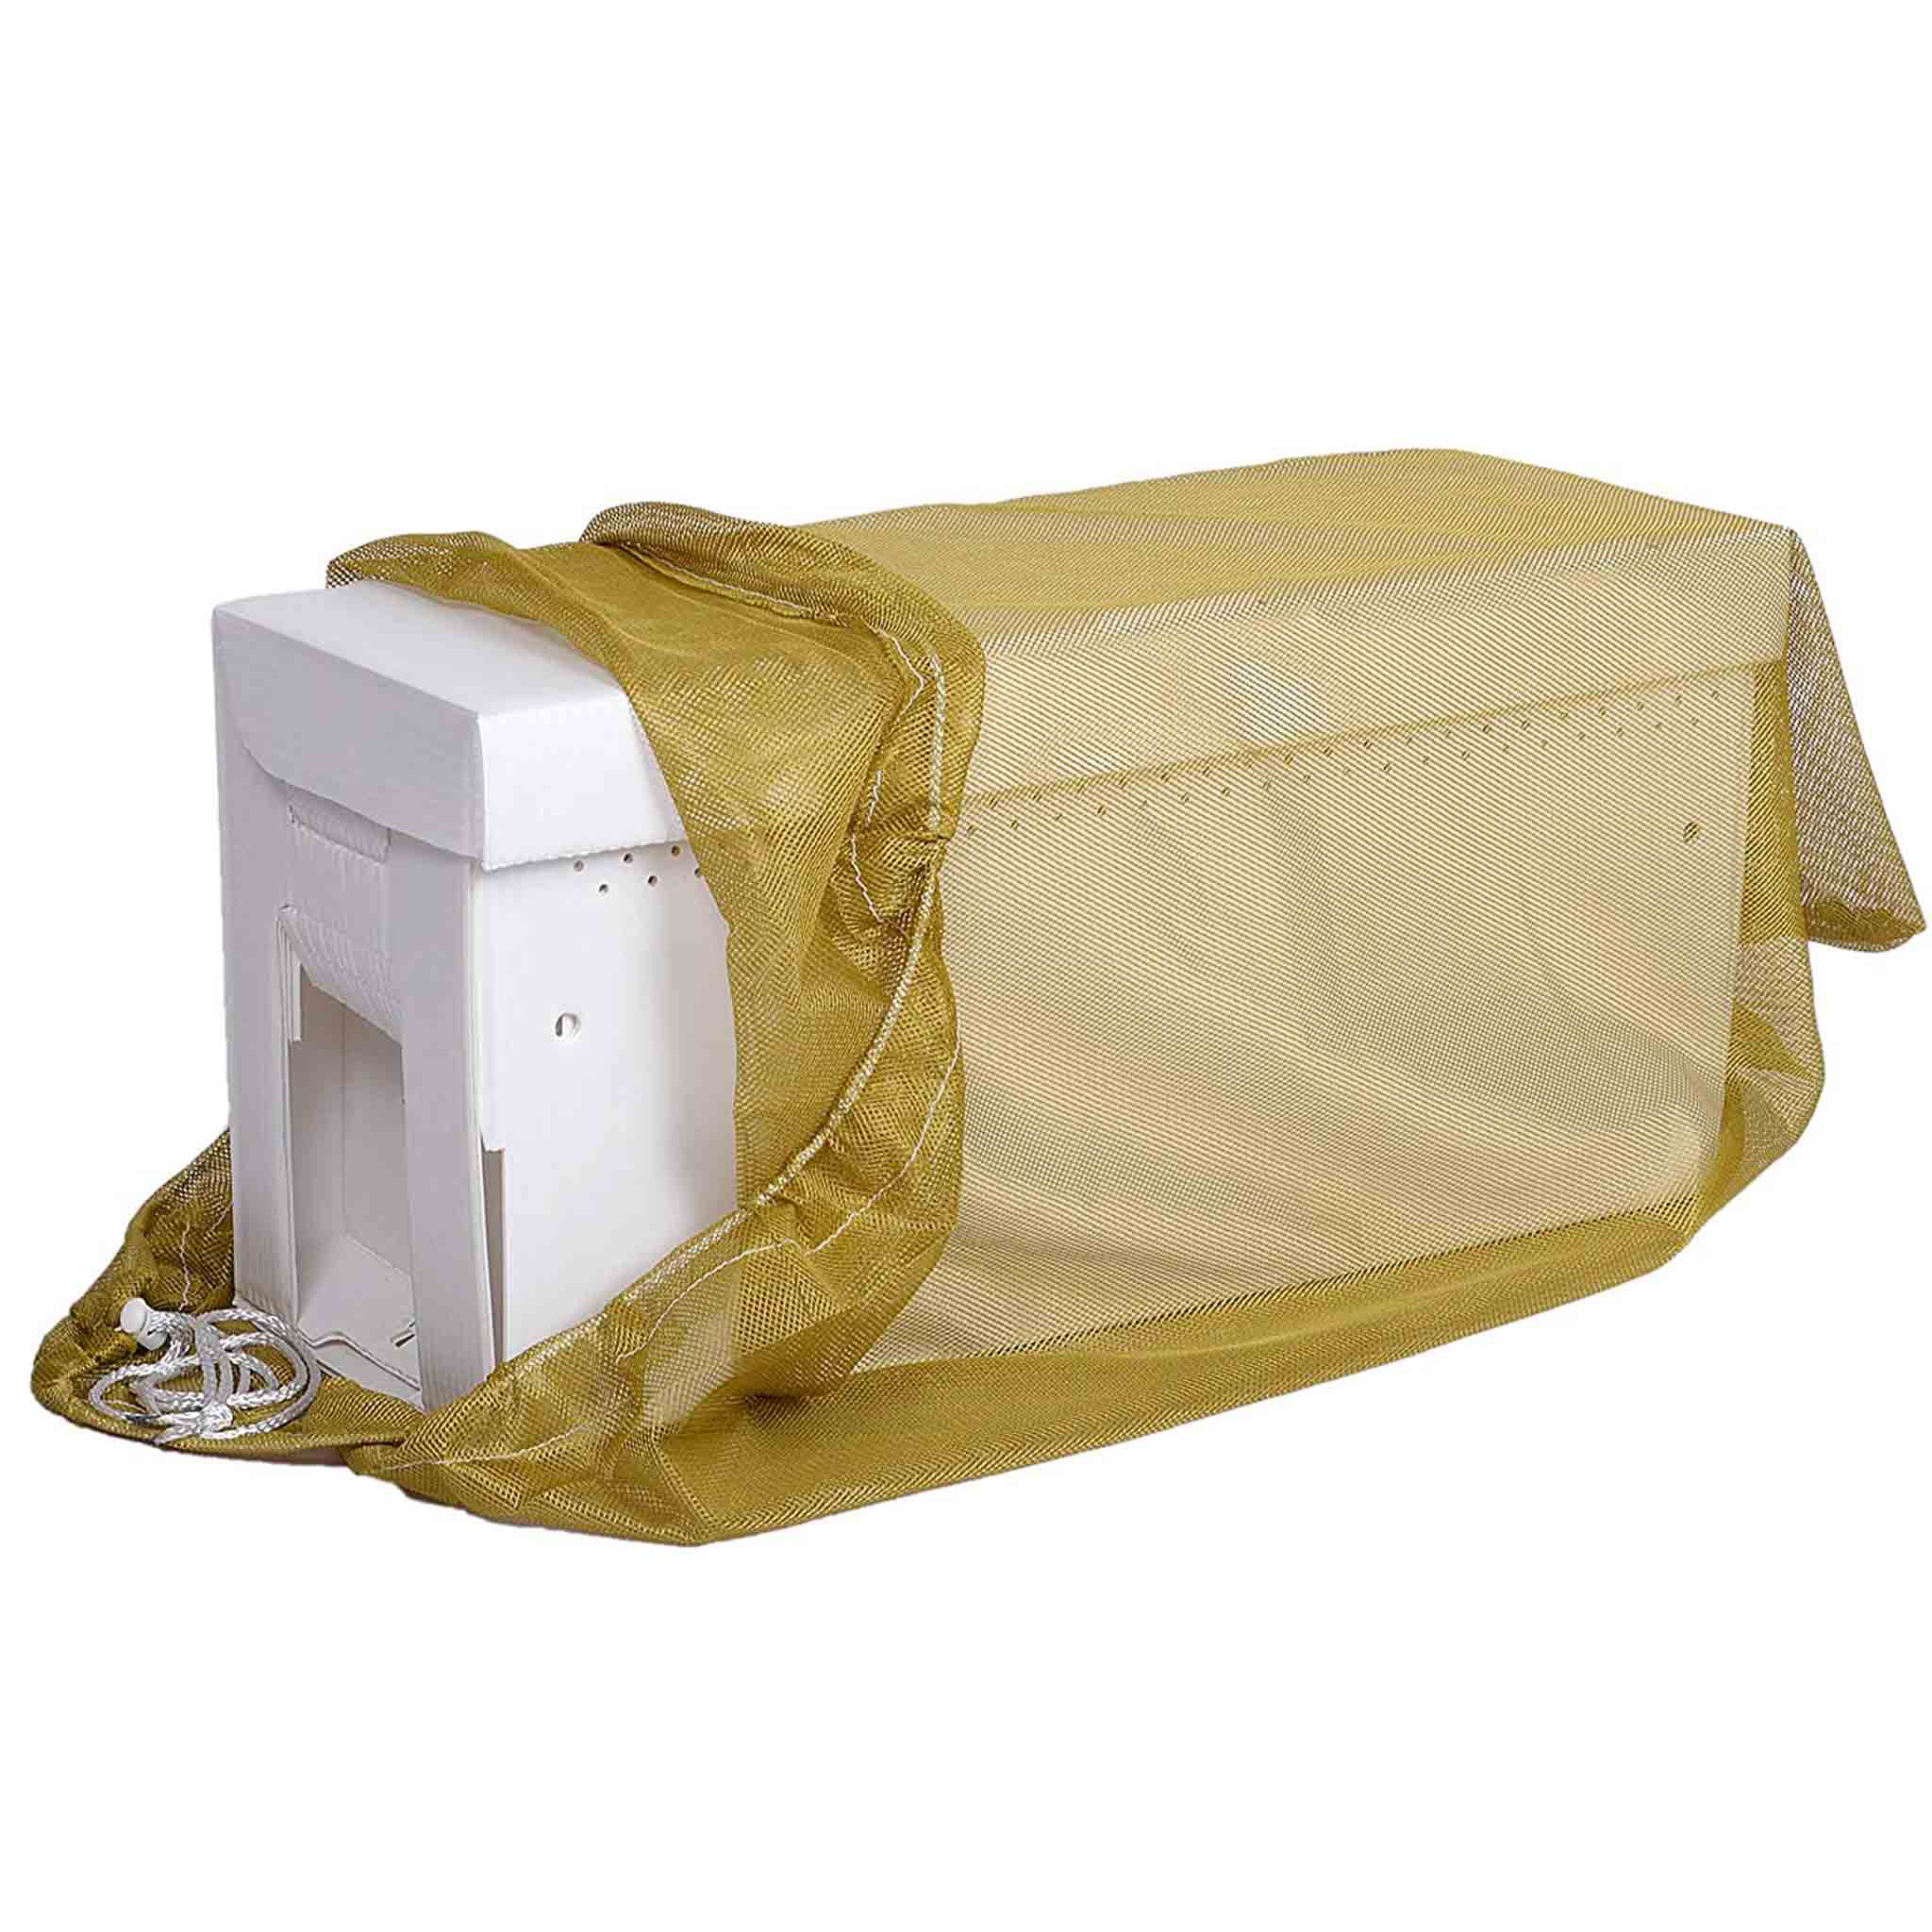 NUC Beehive Protective Bee Containment Net - Accessories collection by Buzzbee Beekeeping Supplies